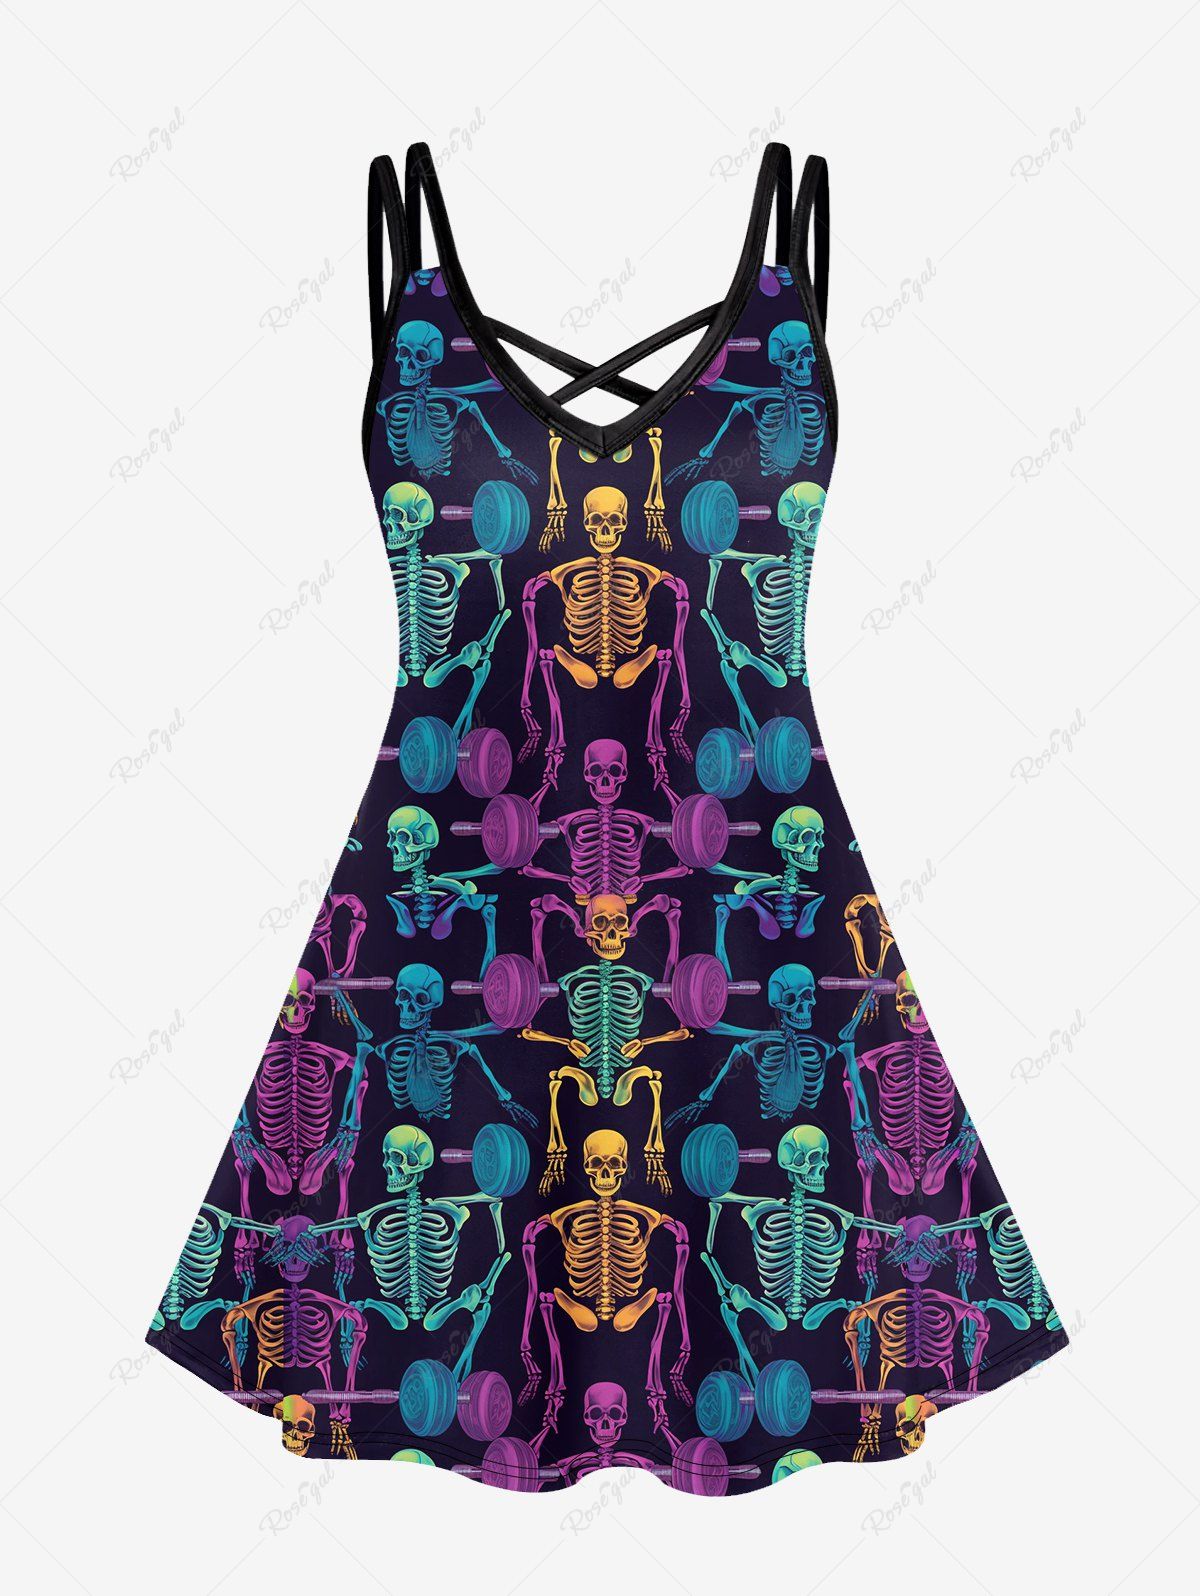 Hot Gothic Skeleton Colorful Print Crisscross Strappy Cami Dress  